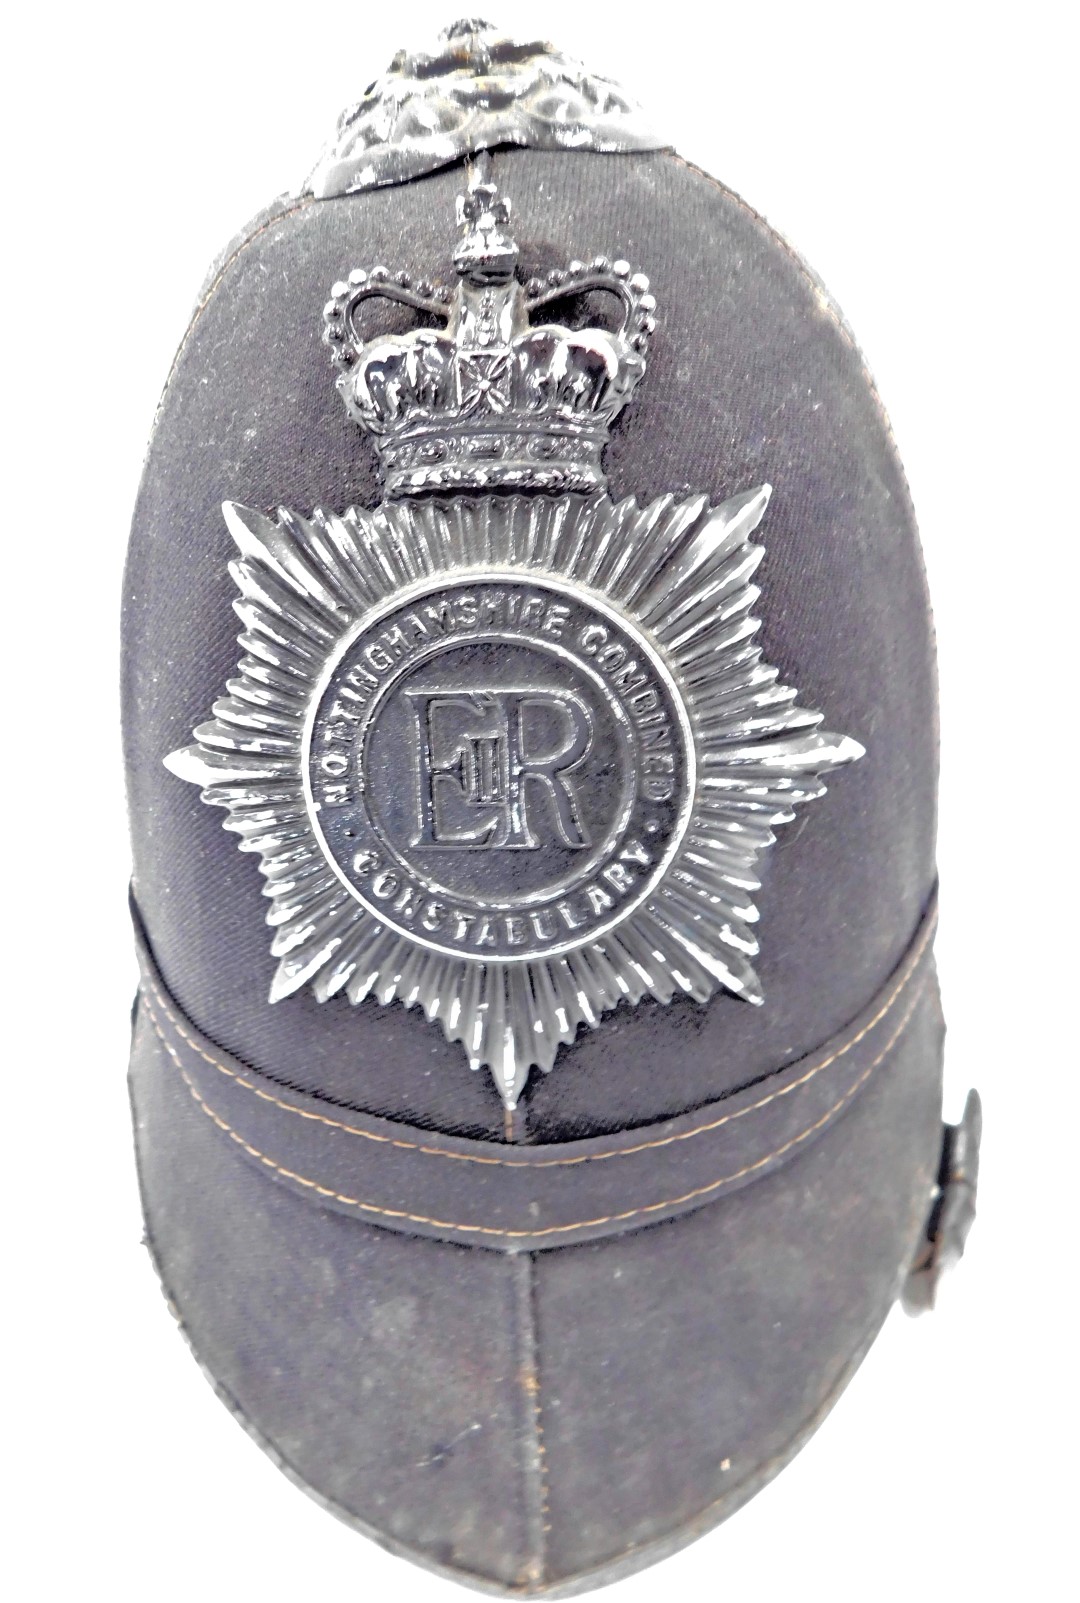 A Nottinghamshire County police helmet, together with a leather bayonet frog. - Image 2 of 3